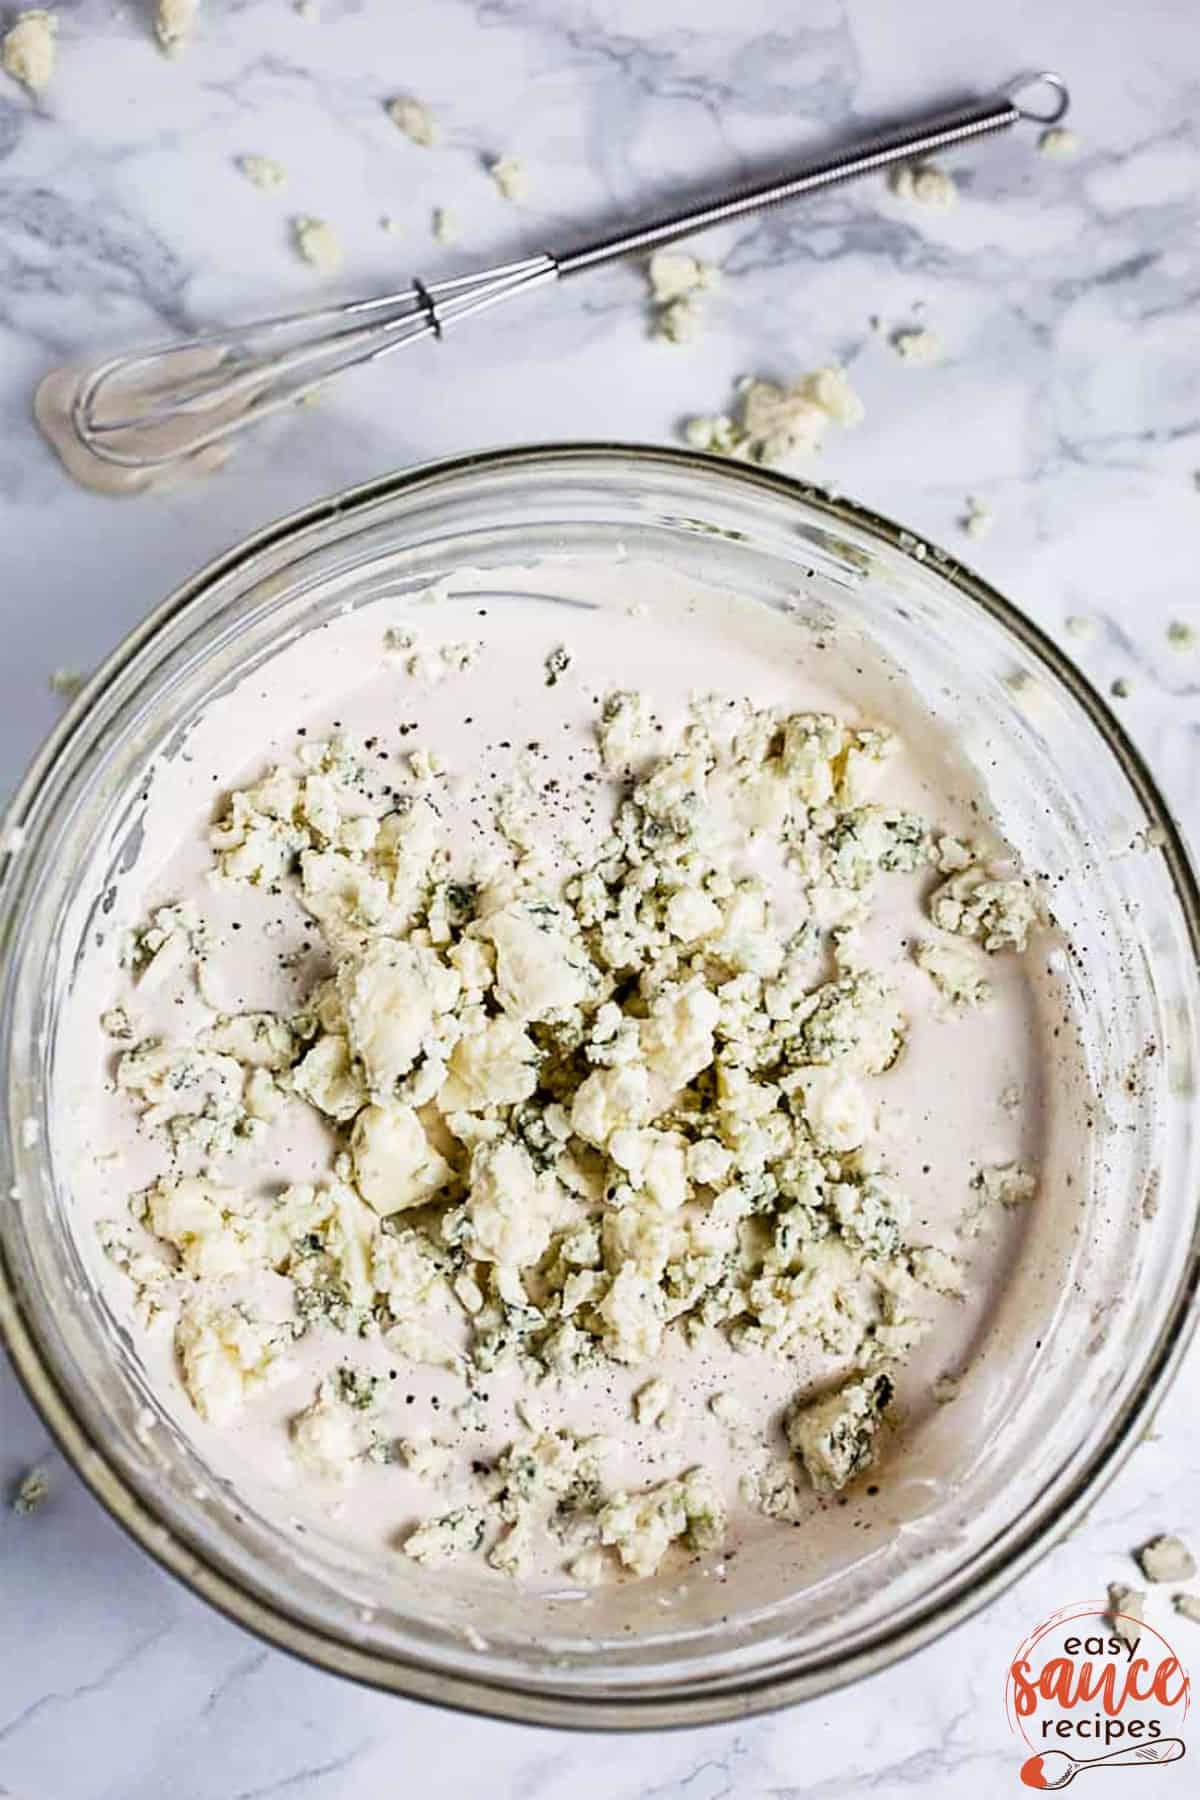 blue cheese crumbles in the dressing base